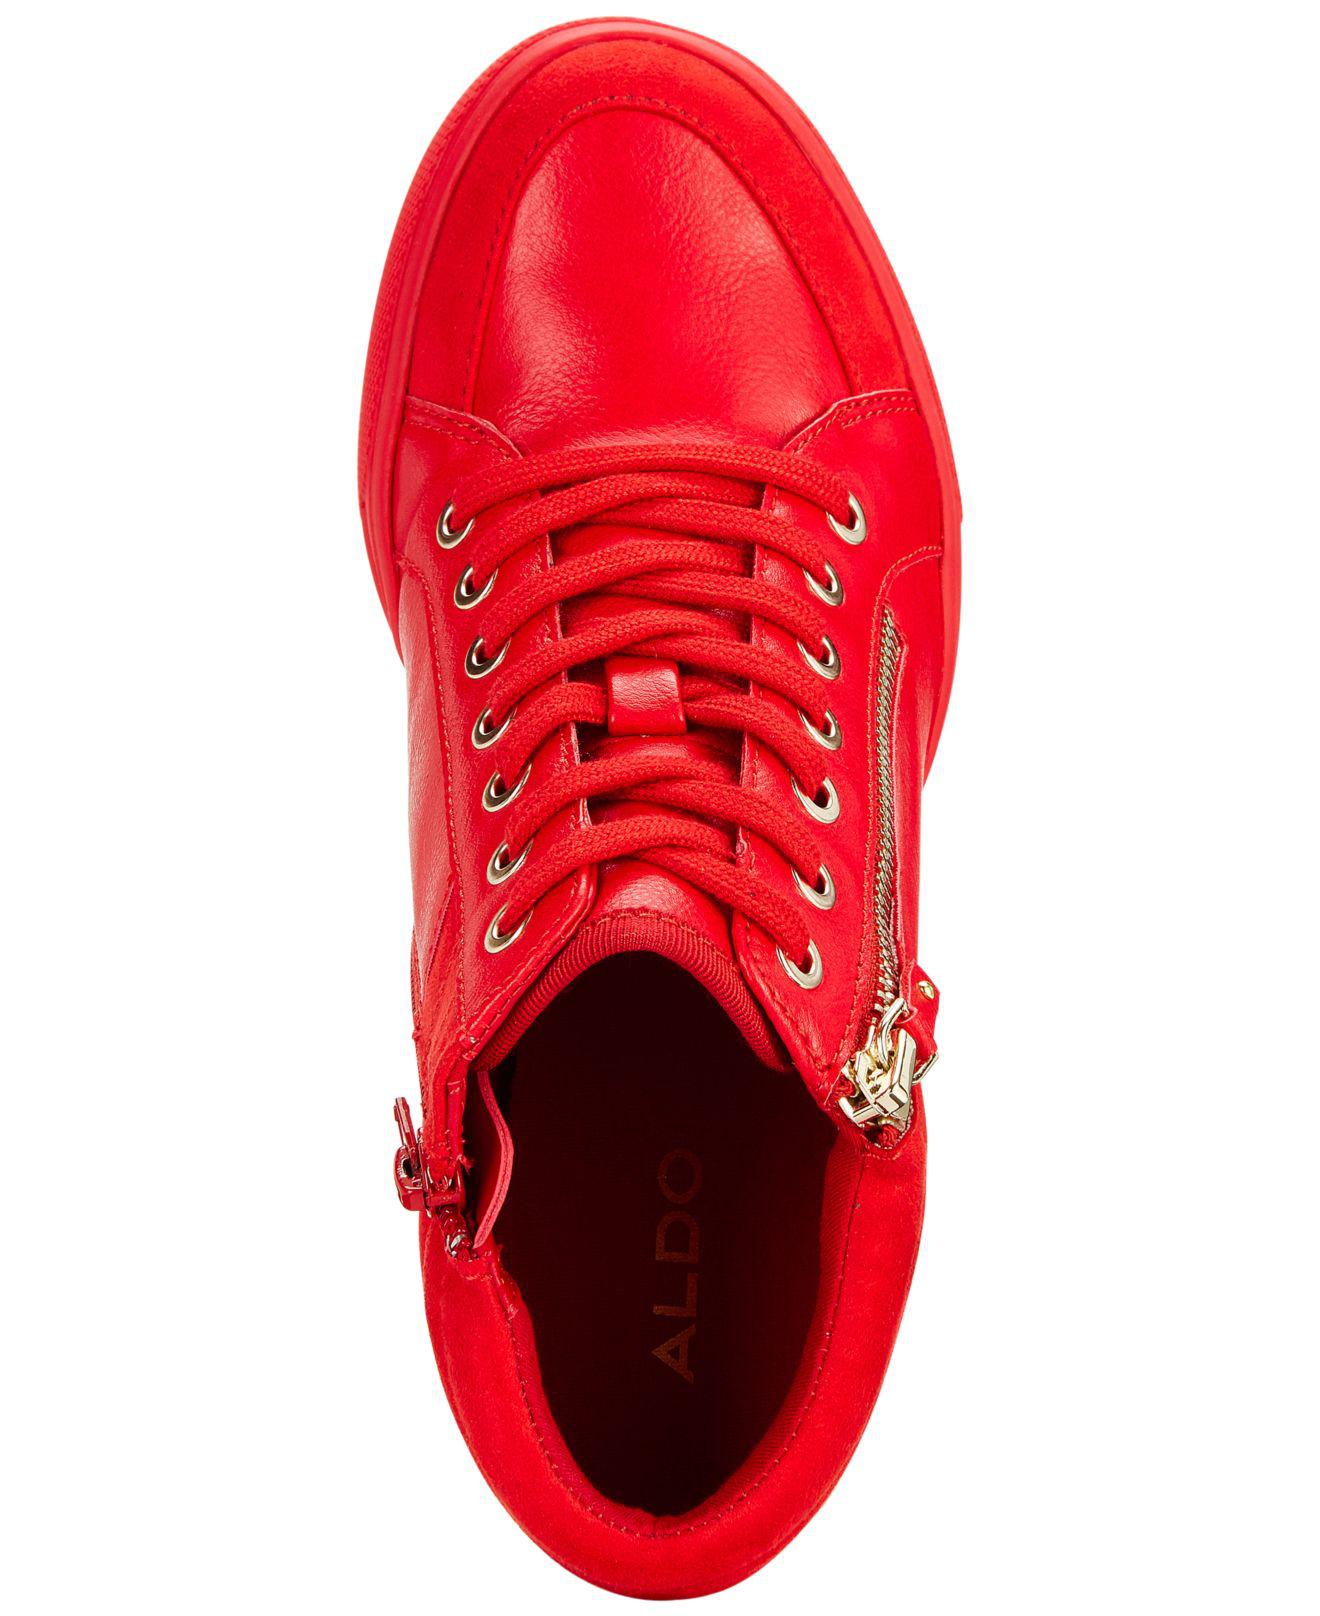 ALDO Kaia Wedge in Red |